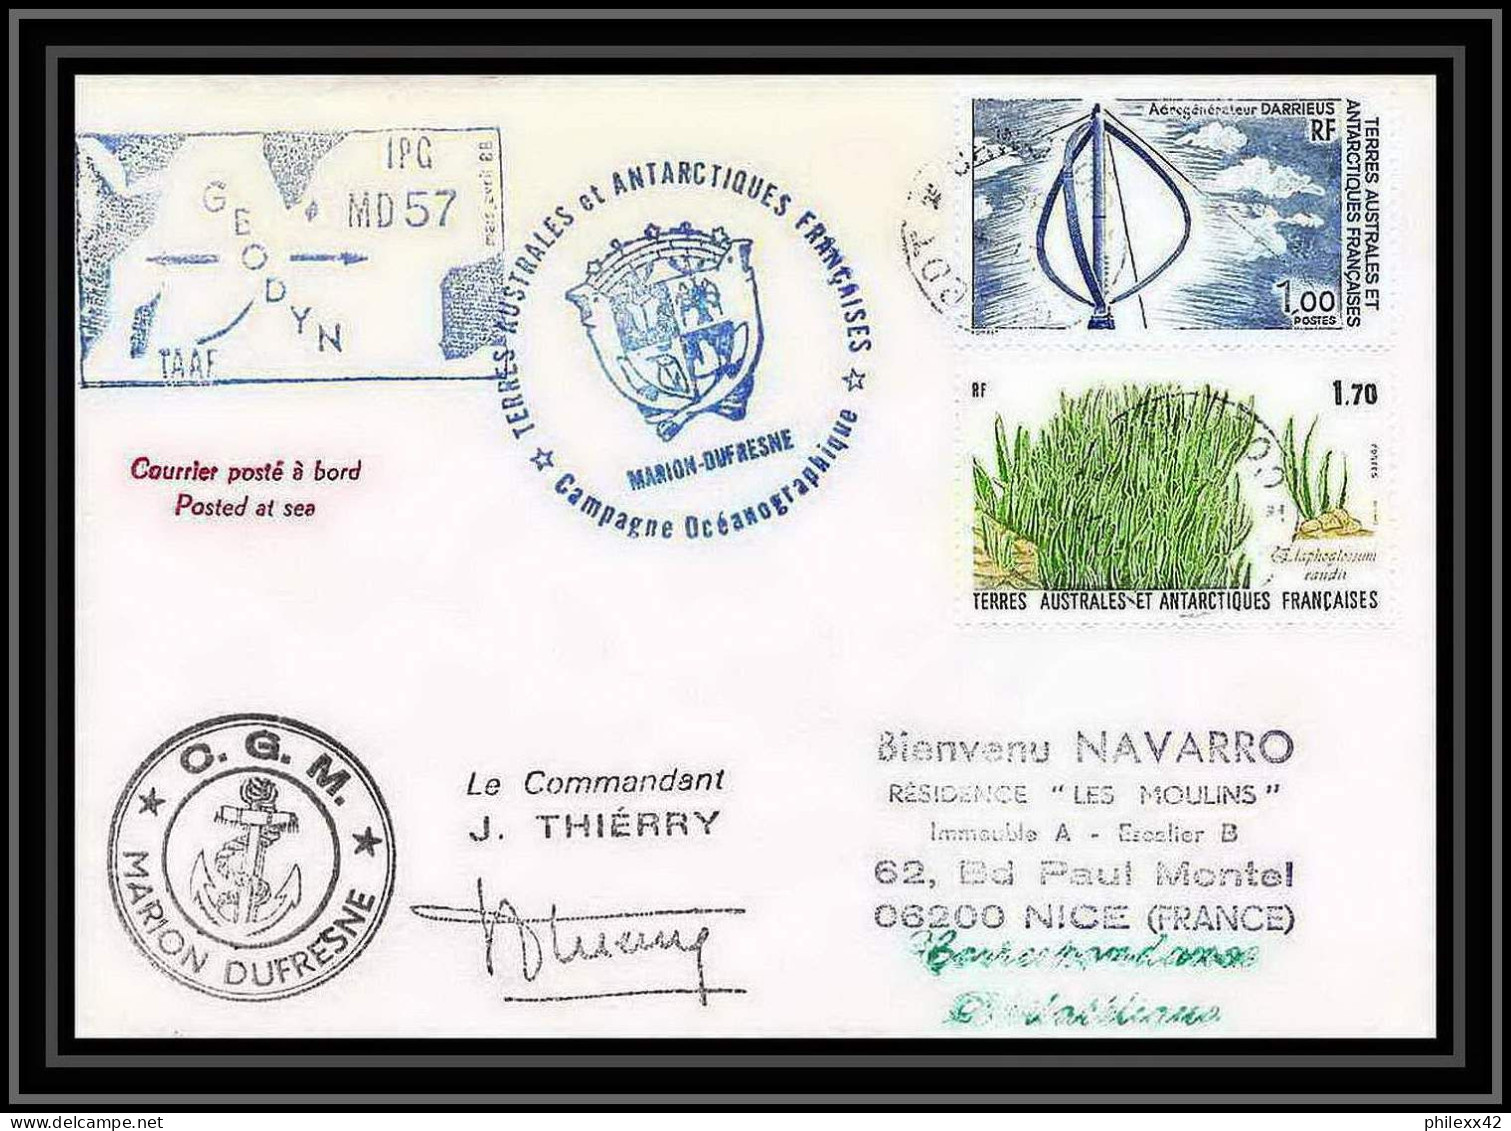 1555 Geodyn Md 57 Marion Dufresne 21/4/1988 Signé Signed Thierry TAAF Antarctic Terres Australes Lettre (cover) - Spedizioni Antartiche